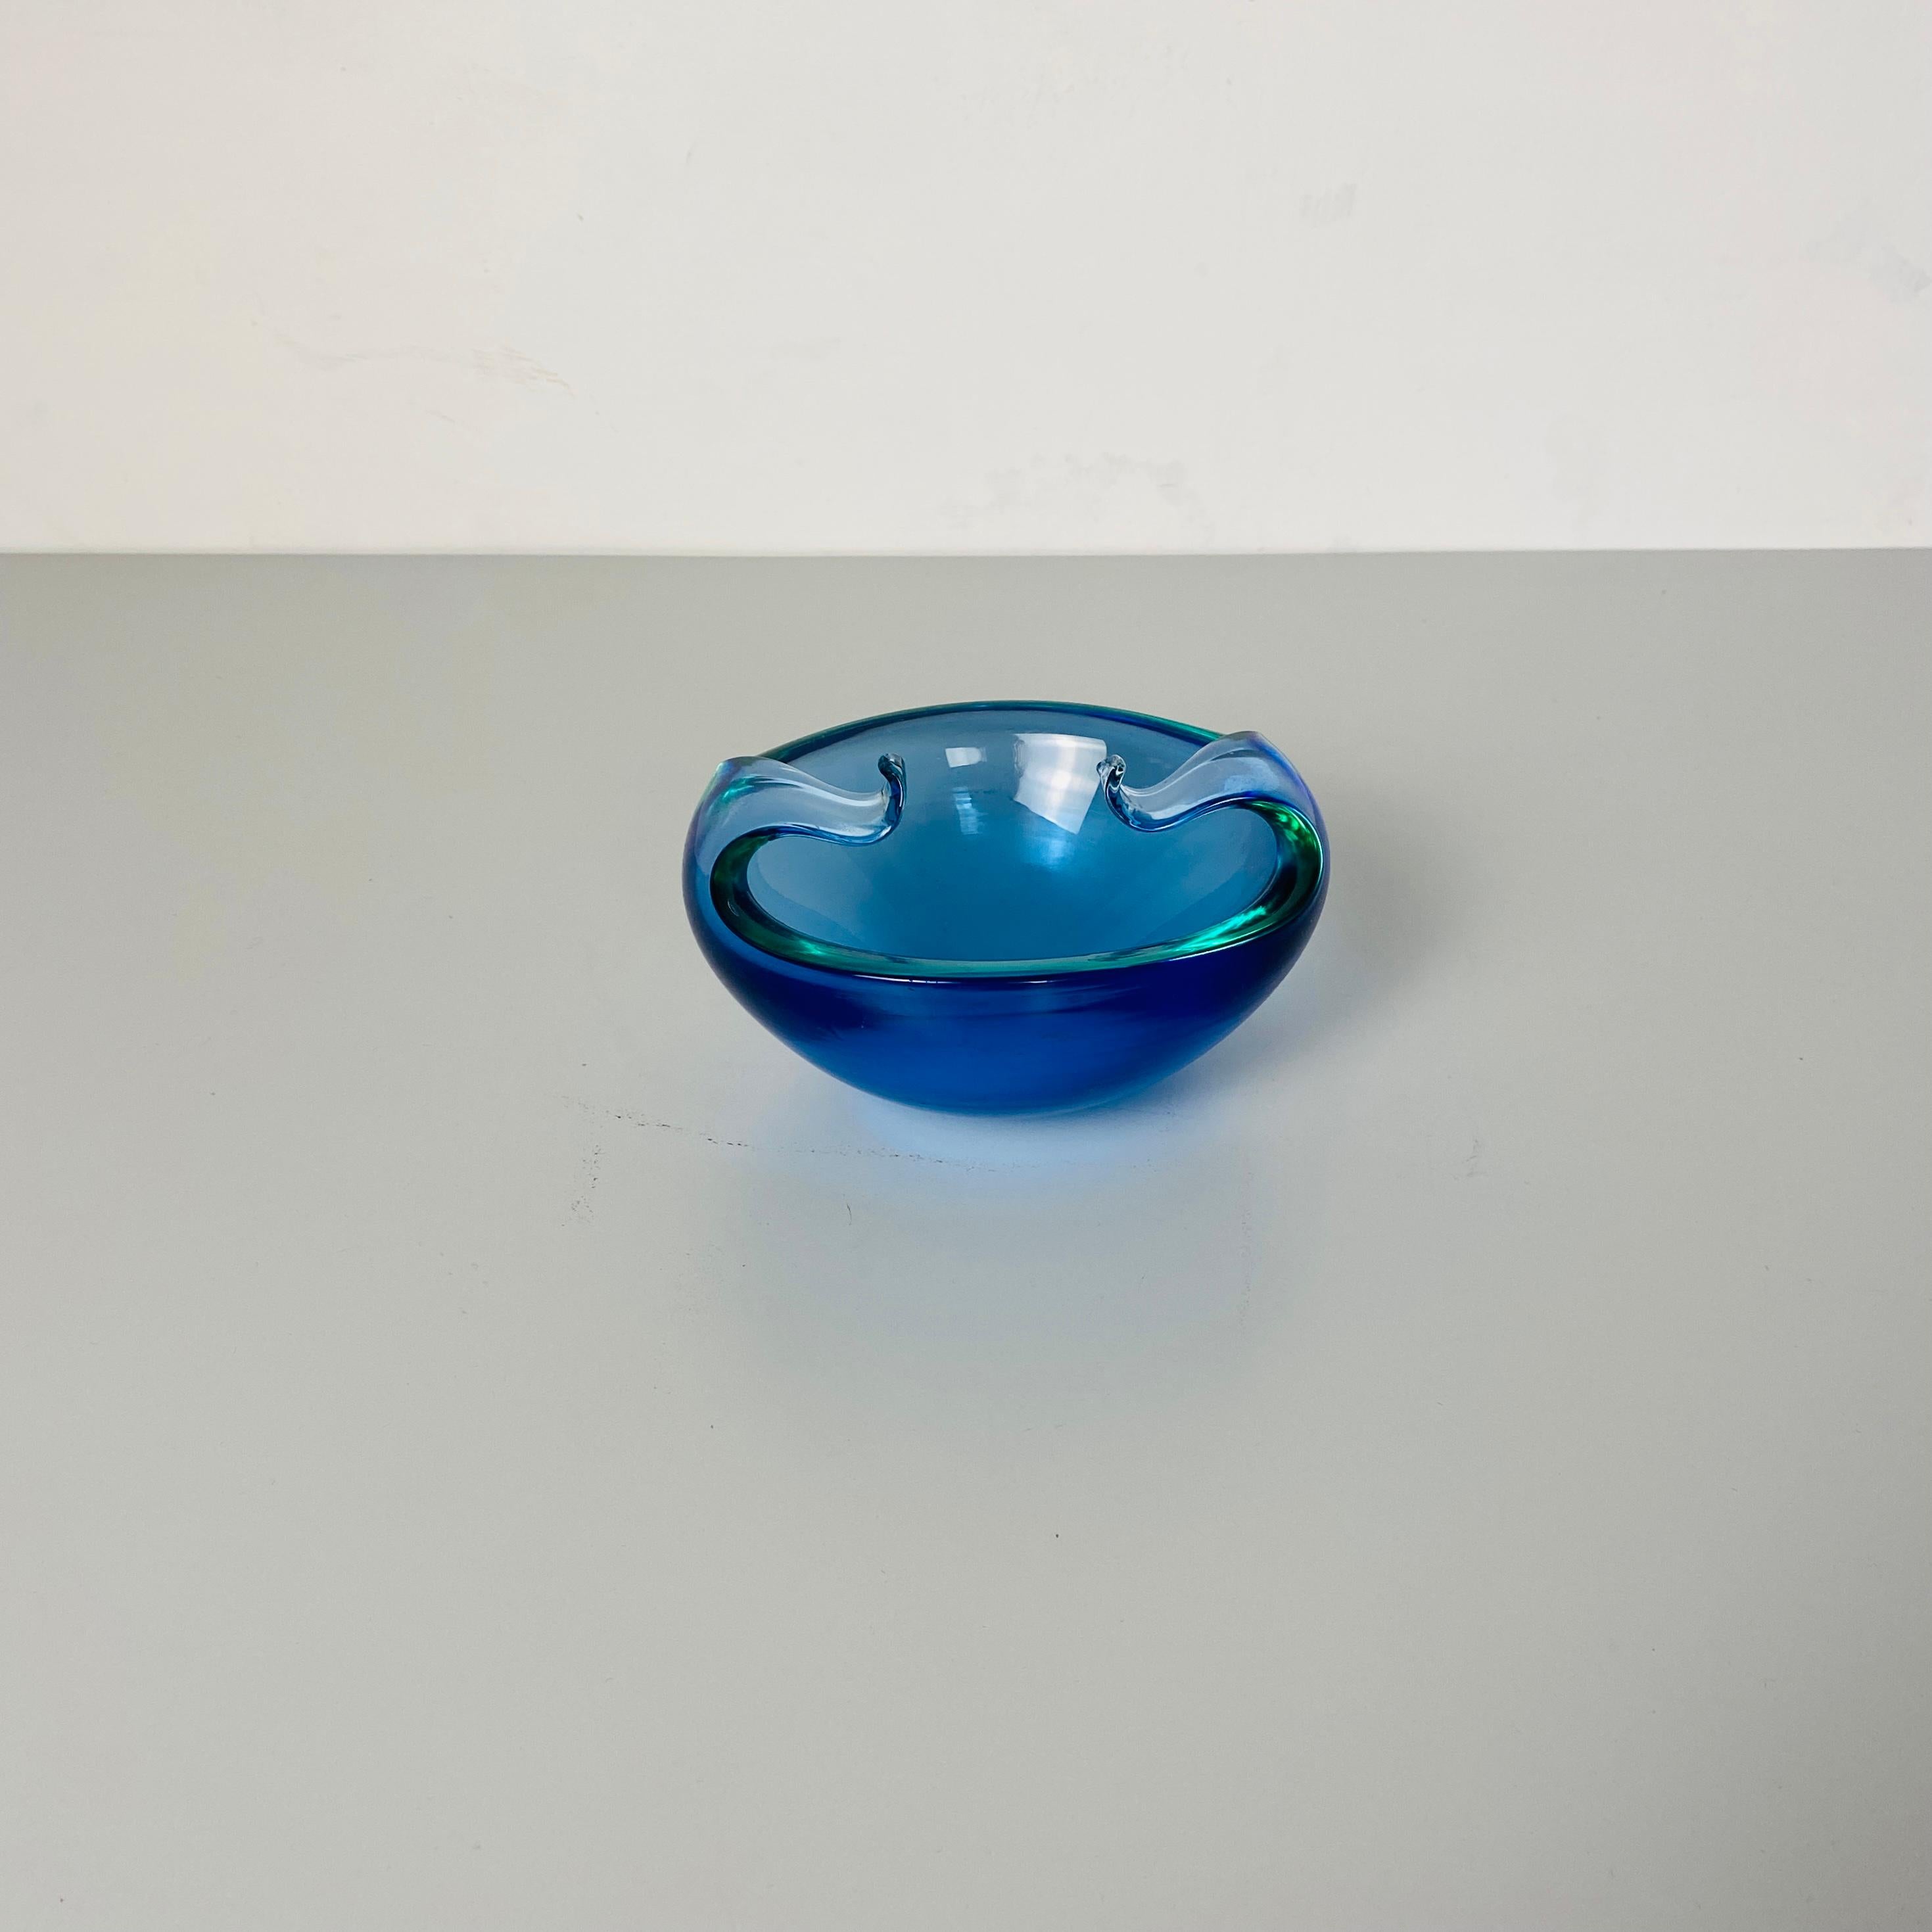 Italian Mid-Century Modern Murano Glass Object Holder with Curled Arms, 1970s In Good Condition For Sale In MIlano, IT